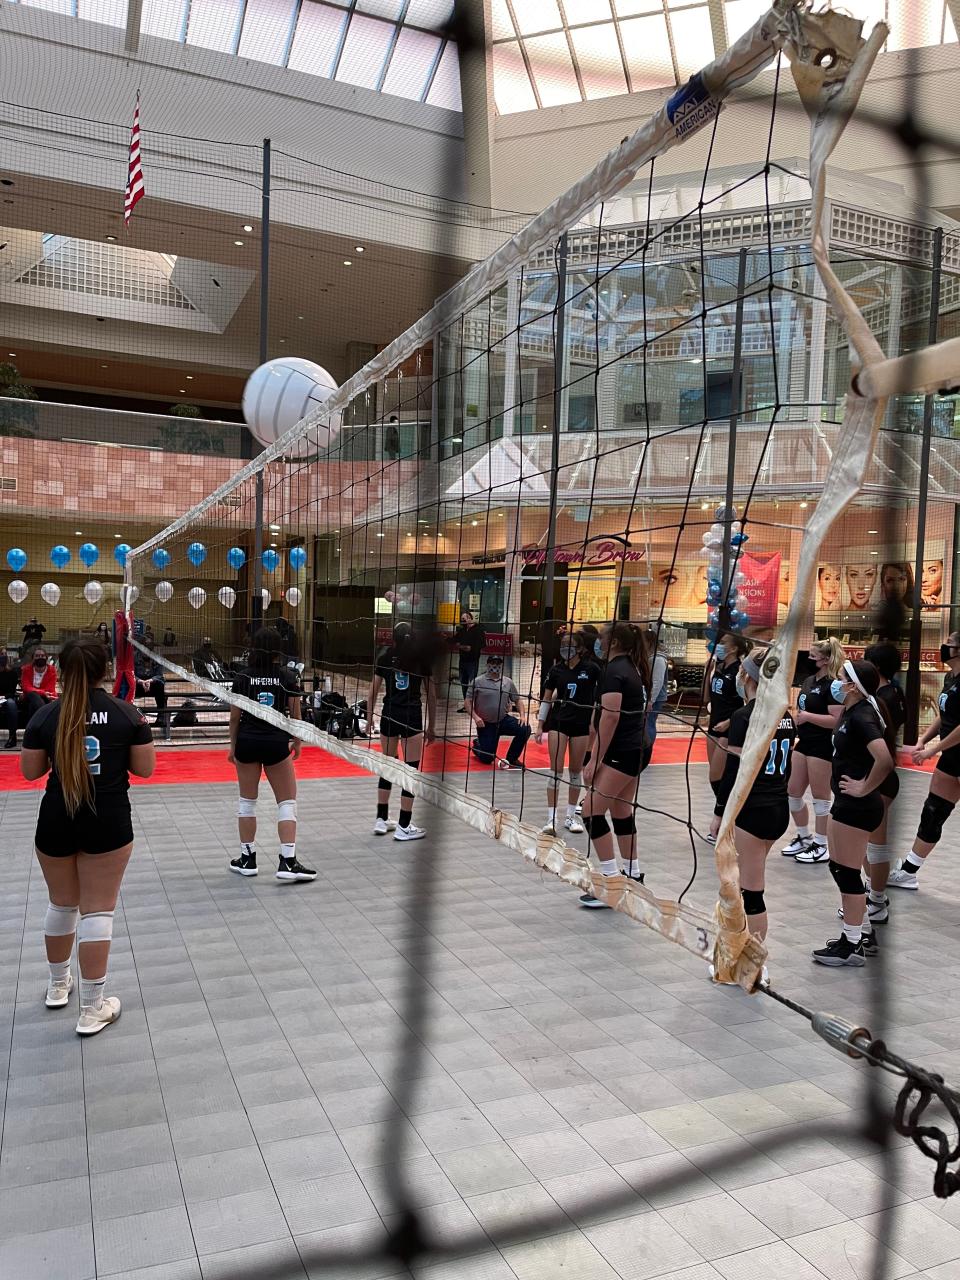 Sunland Park Mall has an indoor volleyball court that is used by members of the Wolf Pack Volleyball Club.